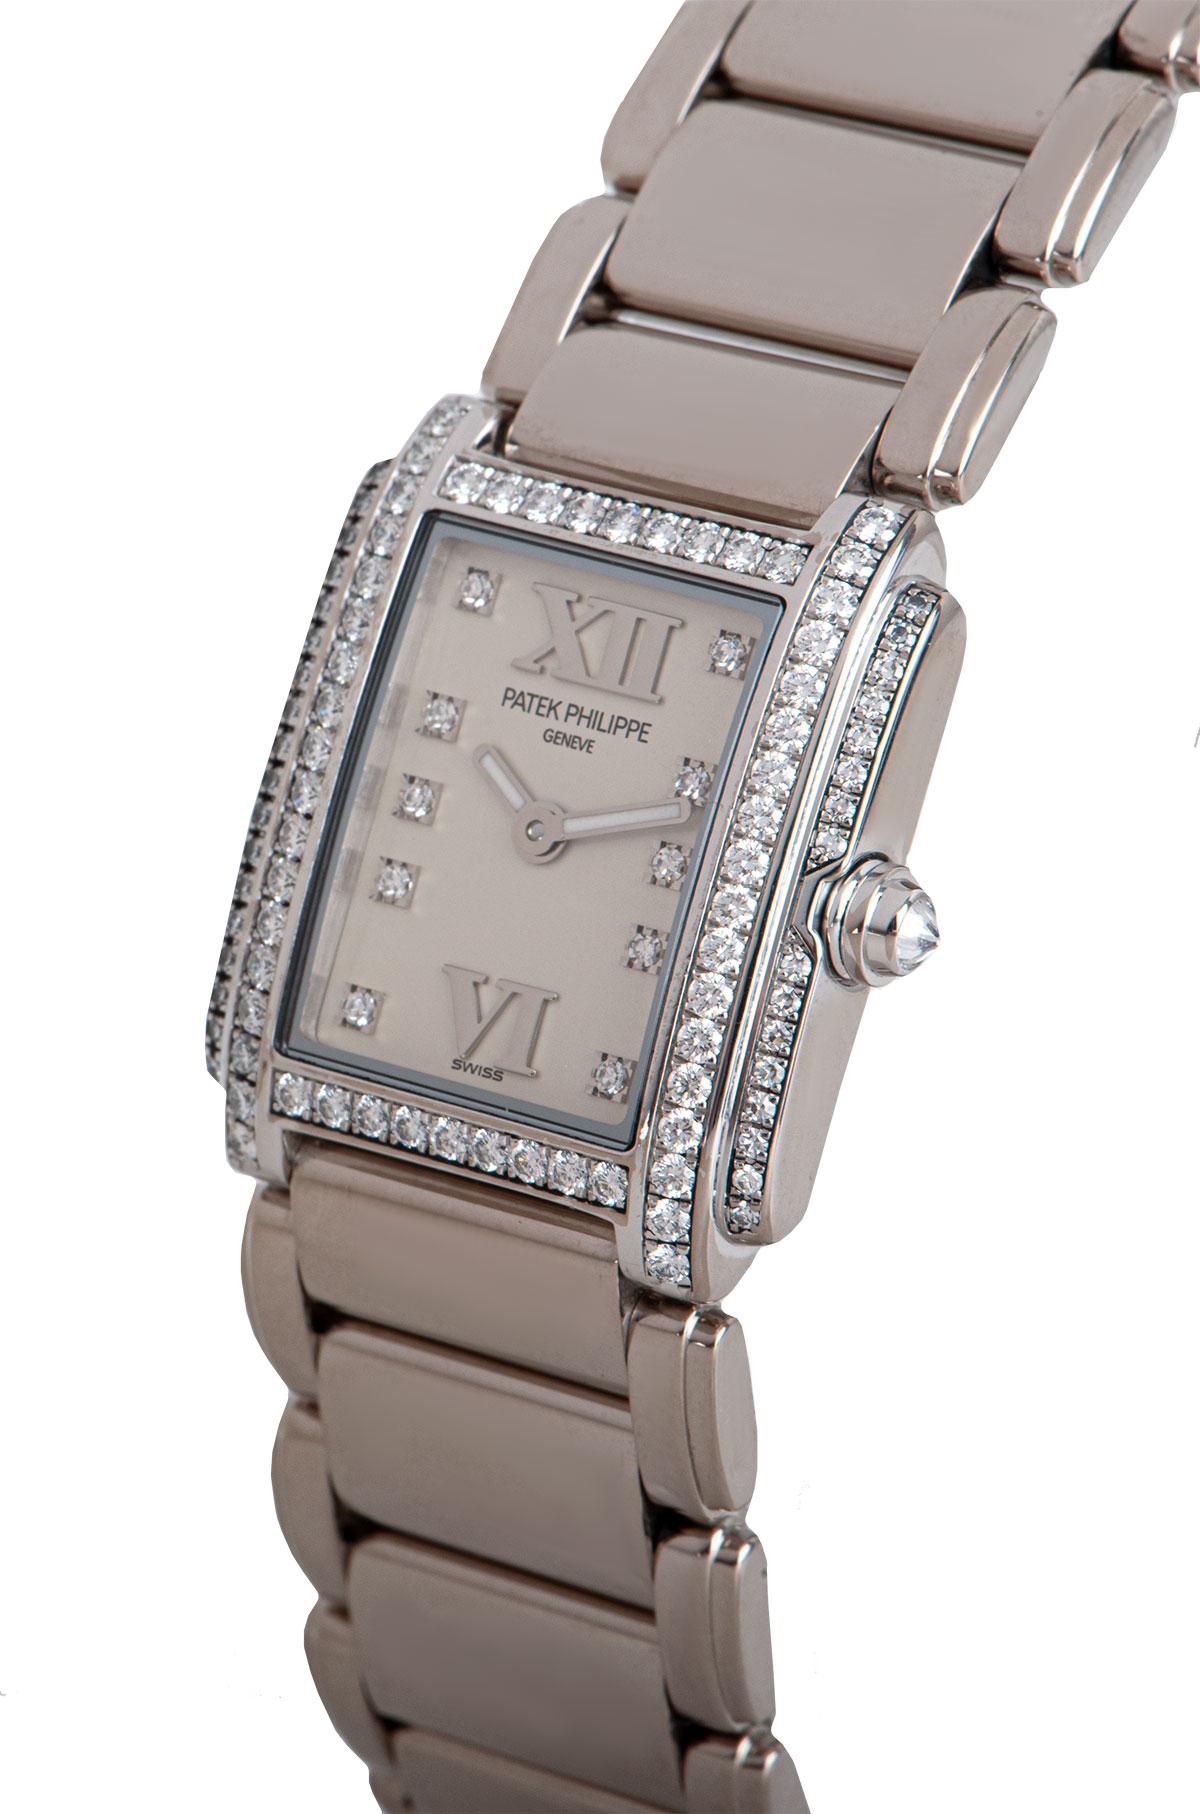 A 22 mm 18k White Gold Twenty-4 Ladies Wristwatch, timeless white dial set with 10 applied round brilliant cut diamond hour markers, applied roman numerals VI and XII, a fixed 18k white gold bezel set with 54 round brilliant cut diamonds, an 18k